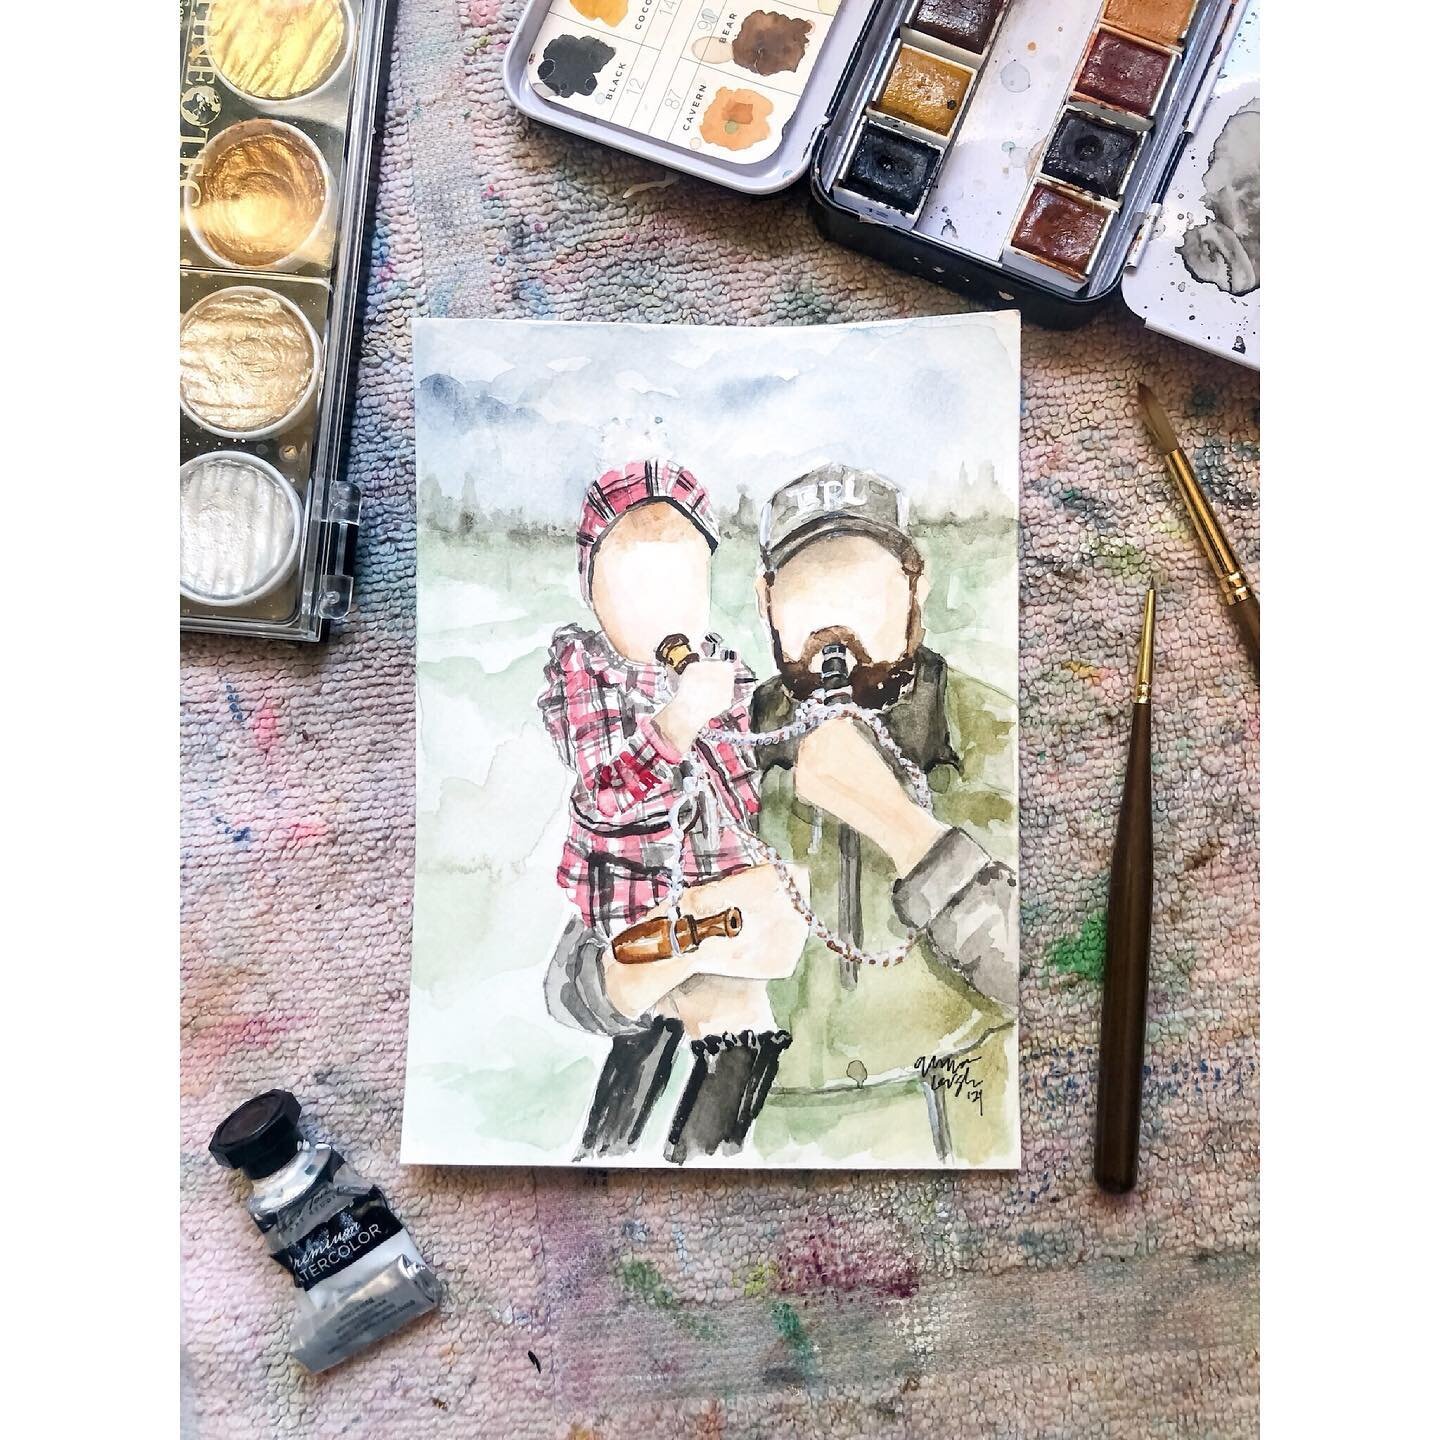 Father Daughter bonding 🪶💚🦆

#watercolor #protrait #fathersday #commission #gift #daddydaughter #annaleighdesign #duckcalls